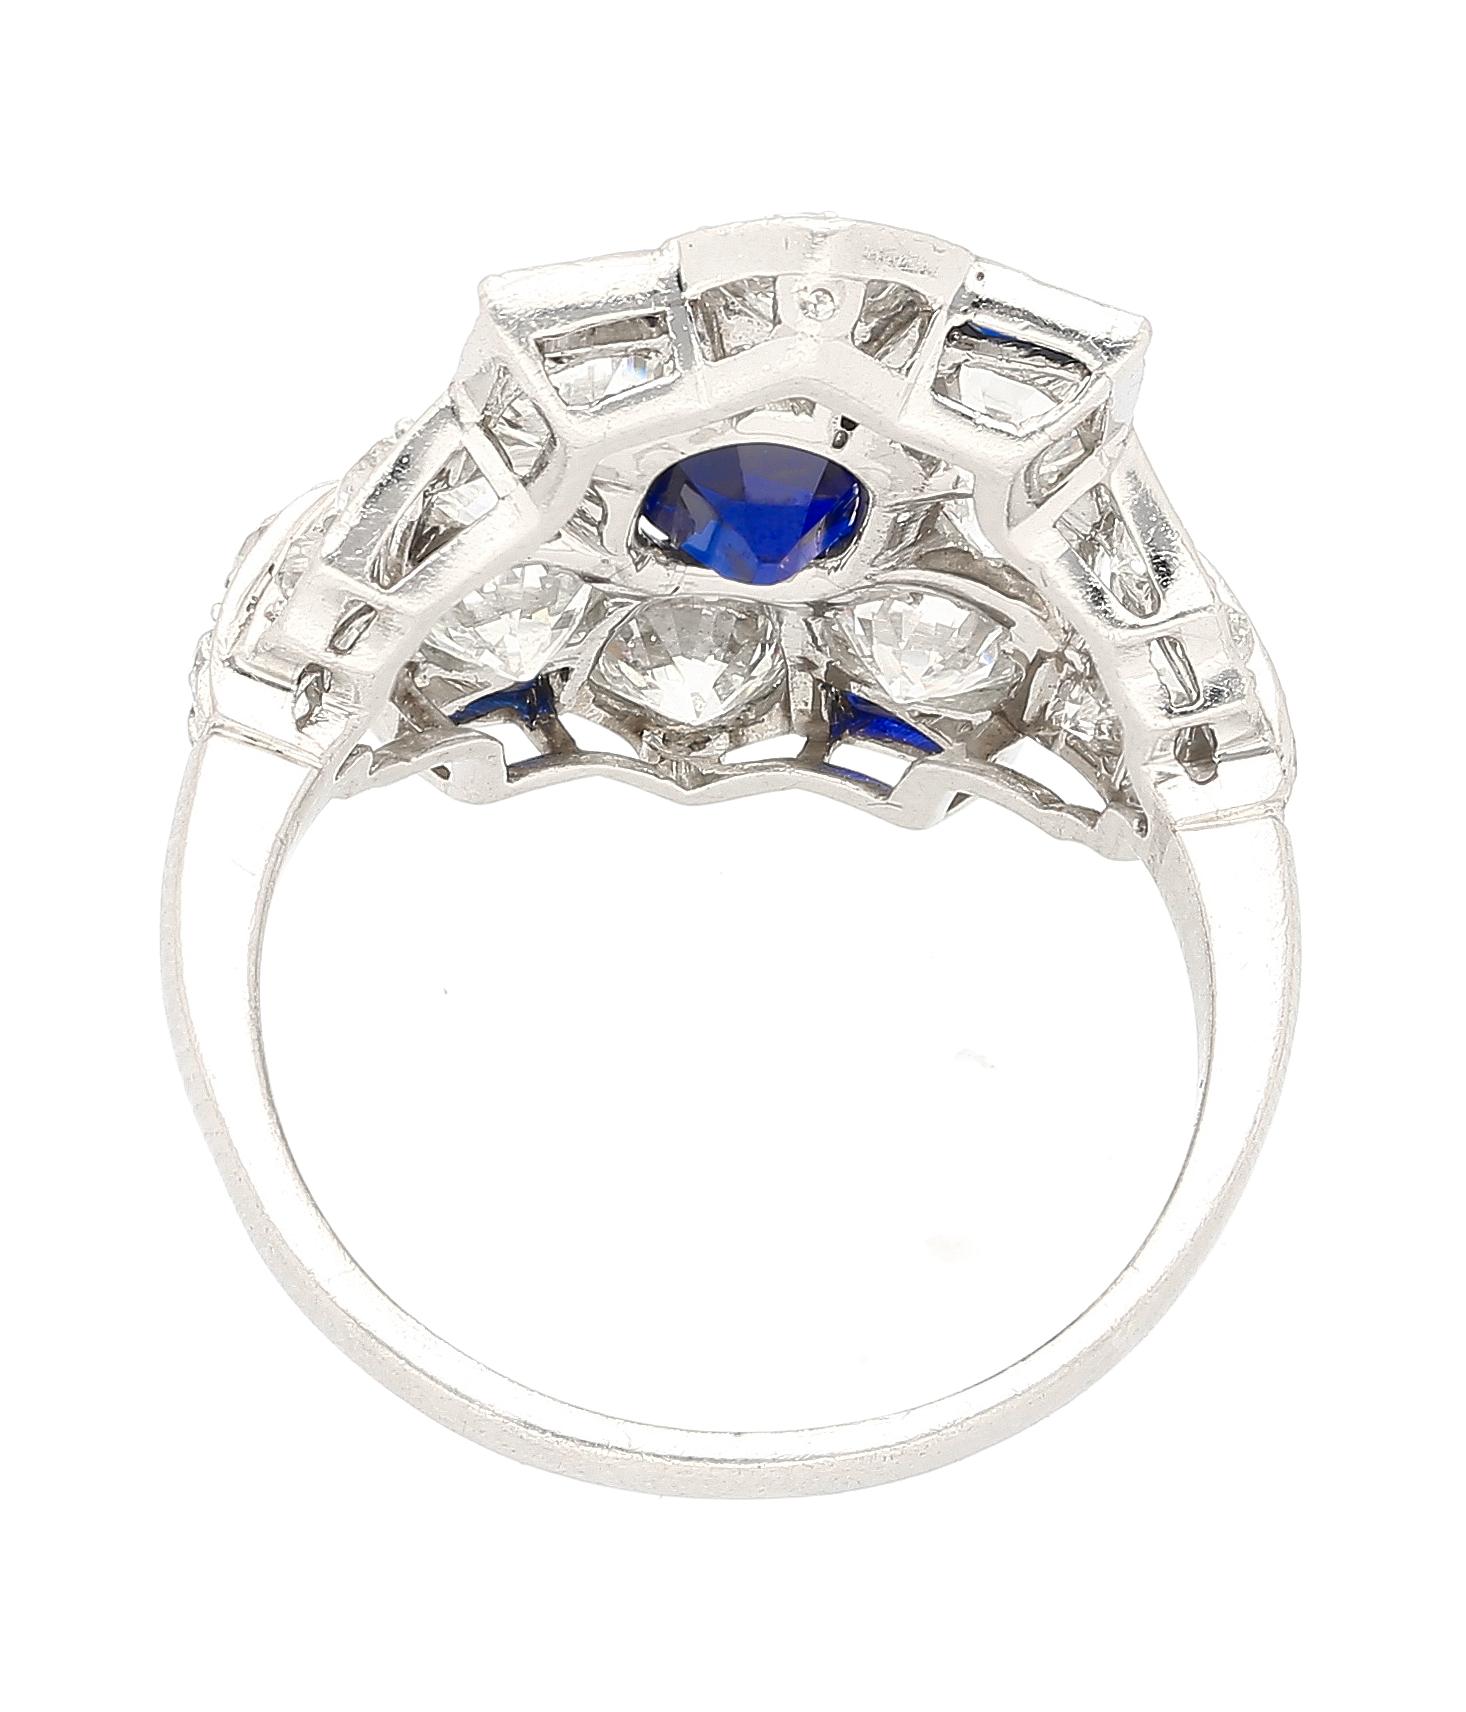 Vintage AGL Certified No Heat Blue Sapphire & Old Euro Cut Diamond Platinum Ring For Sale 1